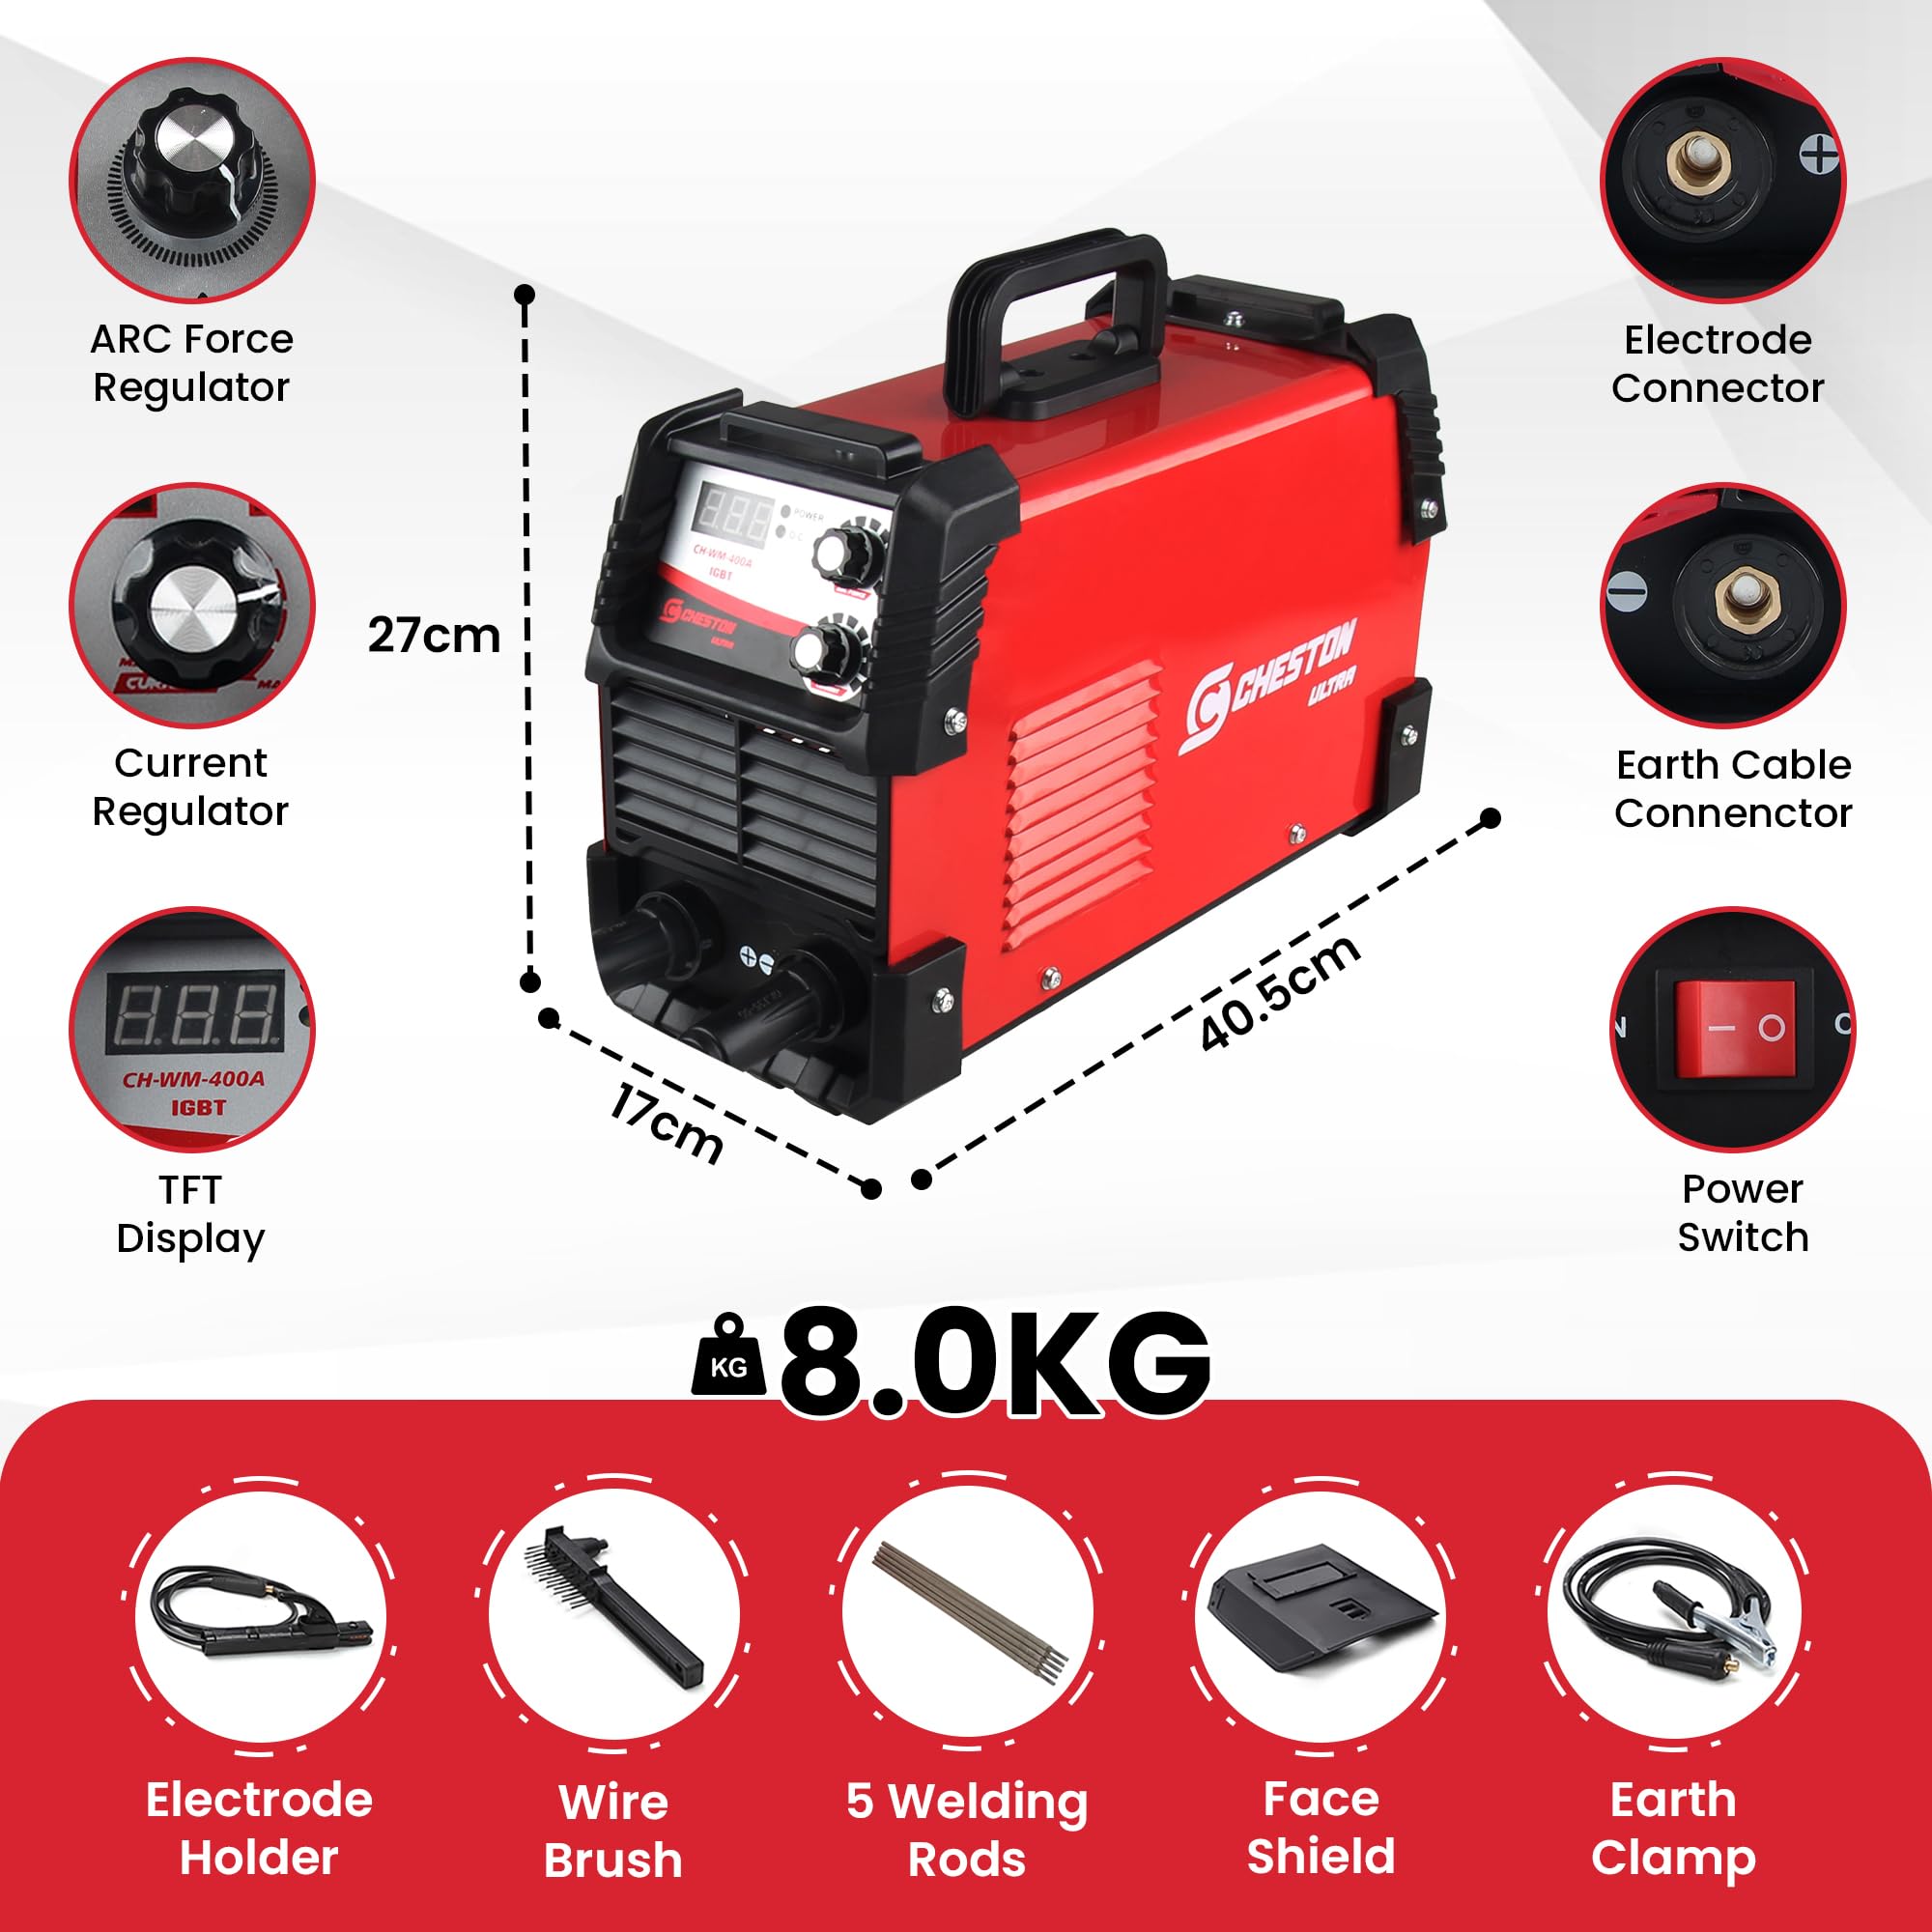 Cheston Ultra 400A Inverter Arc Welding Machine (MMA) LED Display Hot Start Welder Tool Heavy Duty with Welding Mask & Rods | For Steel, Iron, Aluminium, Copper & all other Metals Professional Use